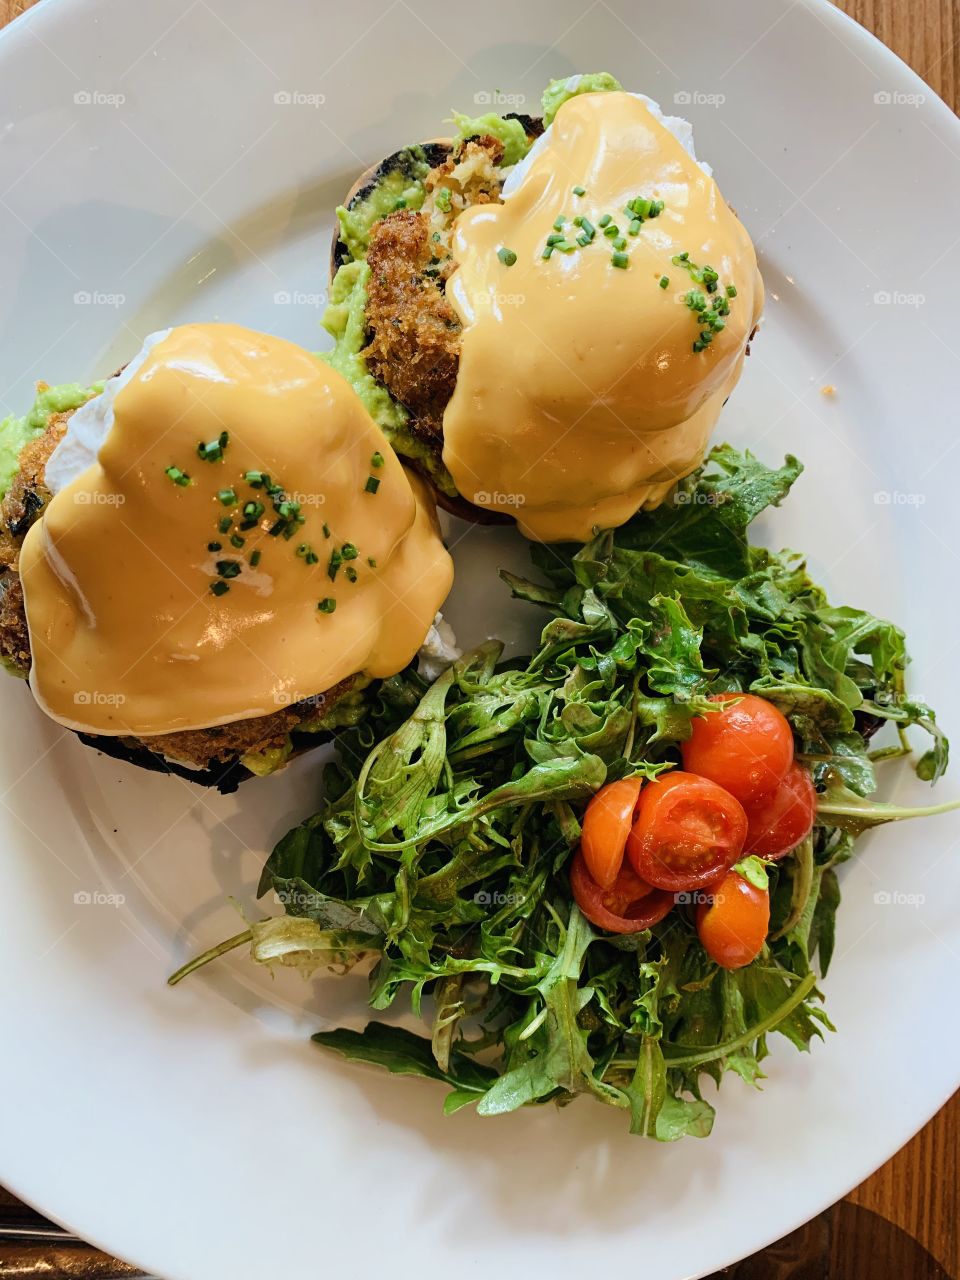 Avocado crab cake Benedict in a chill weekend 